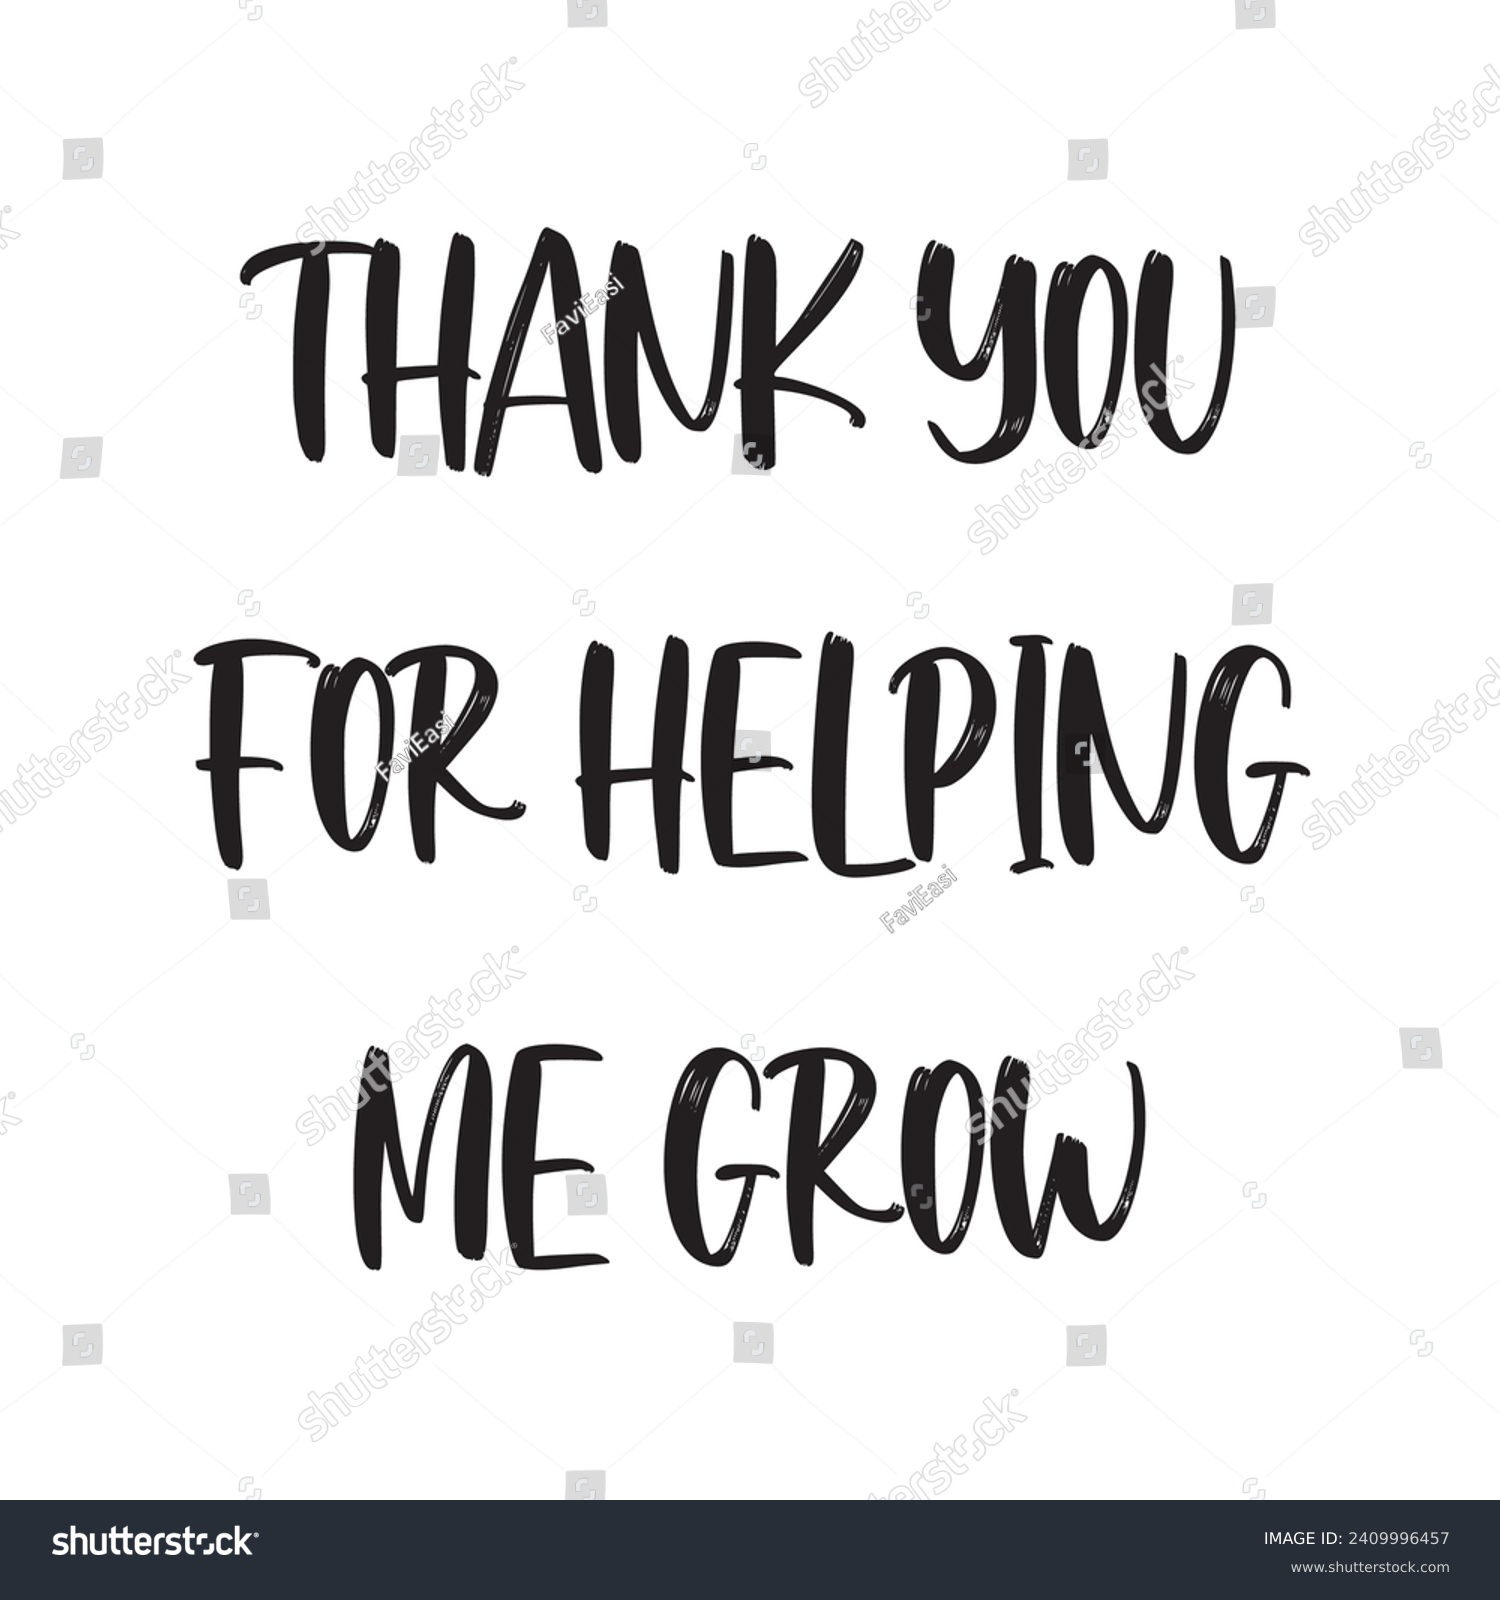 SVG of Thank You for Helping Me Grow Lettering Quotes. Vector Illustration svg